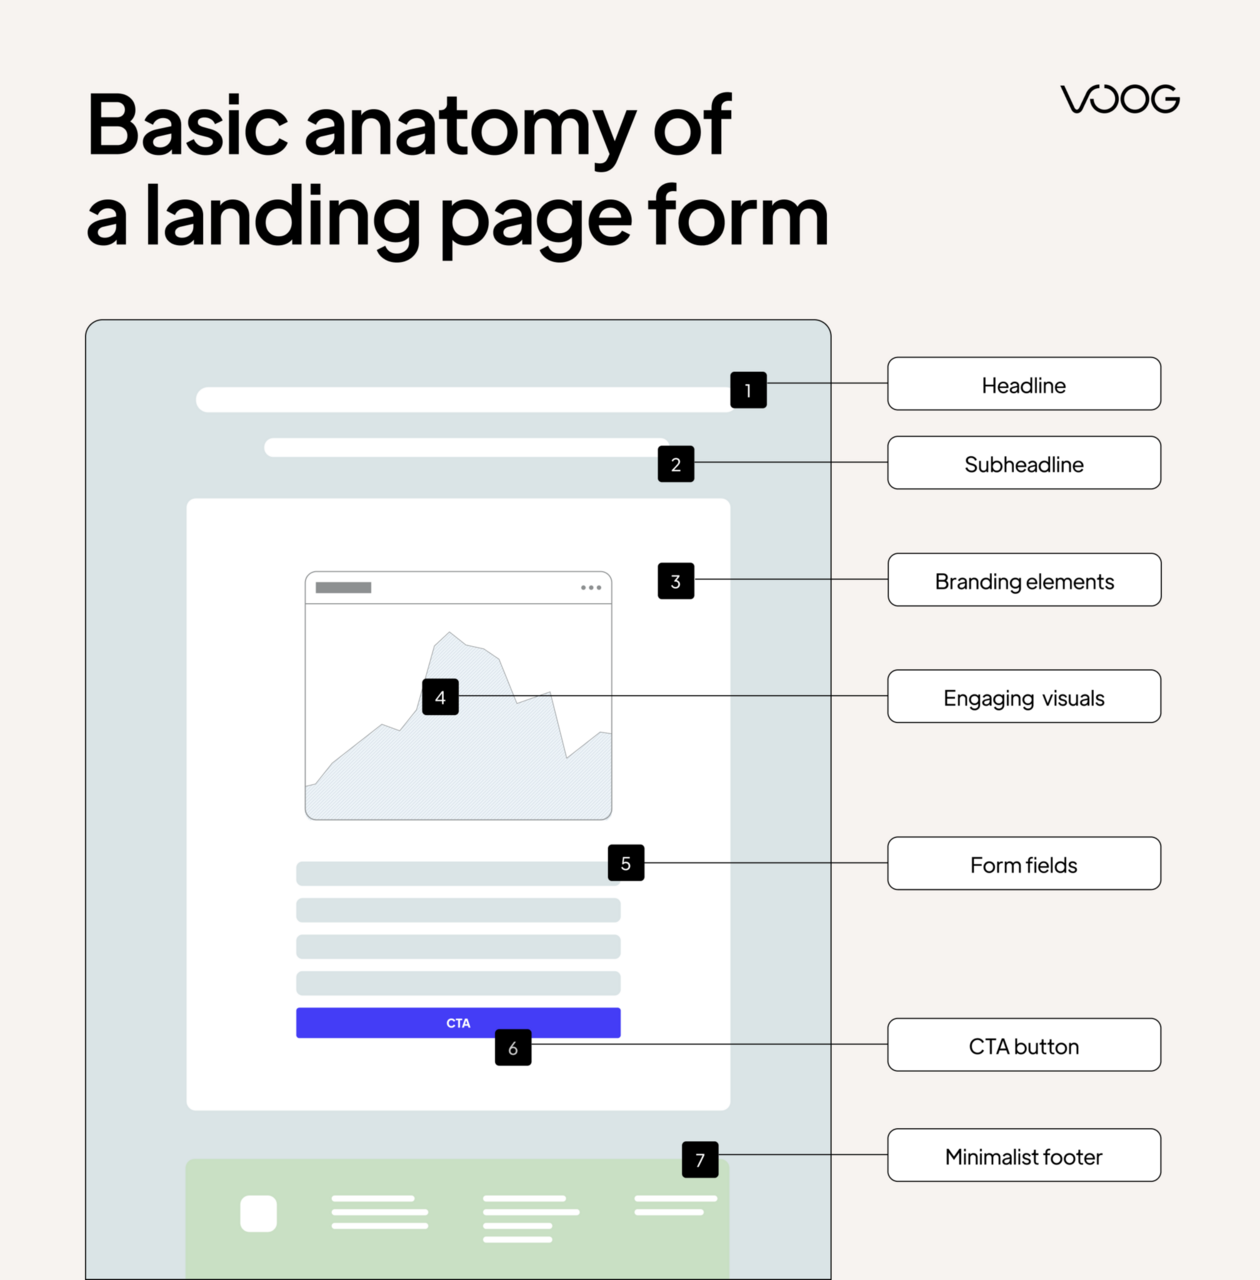 Basic anatomy of a landing page form